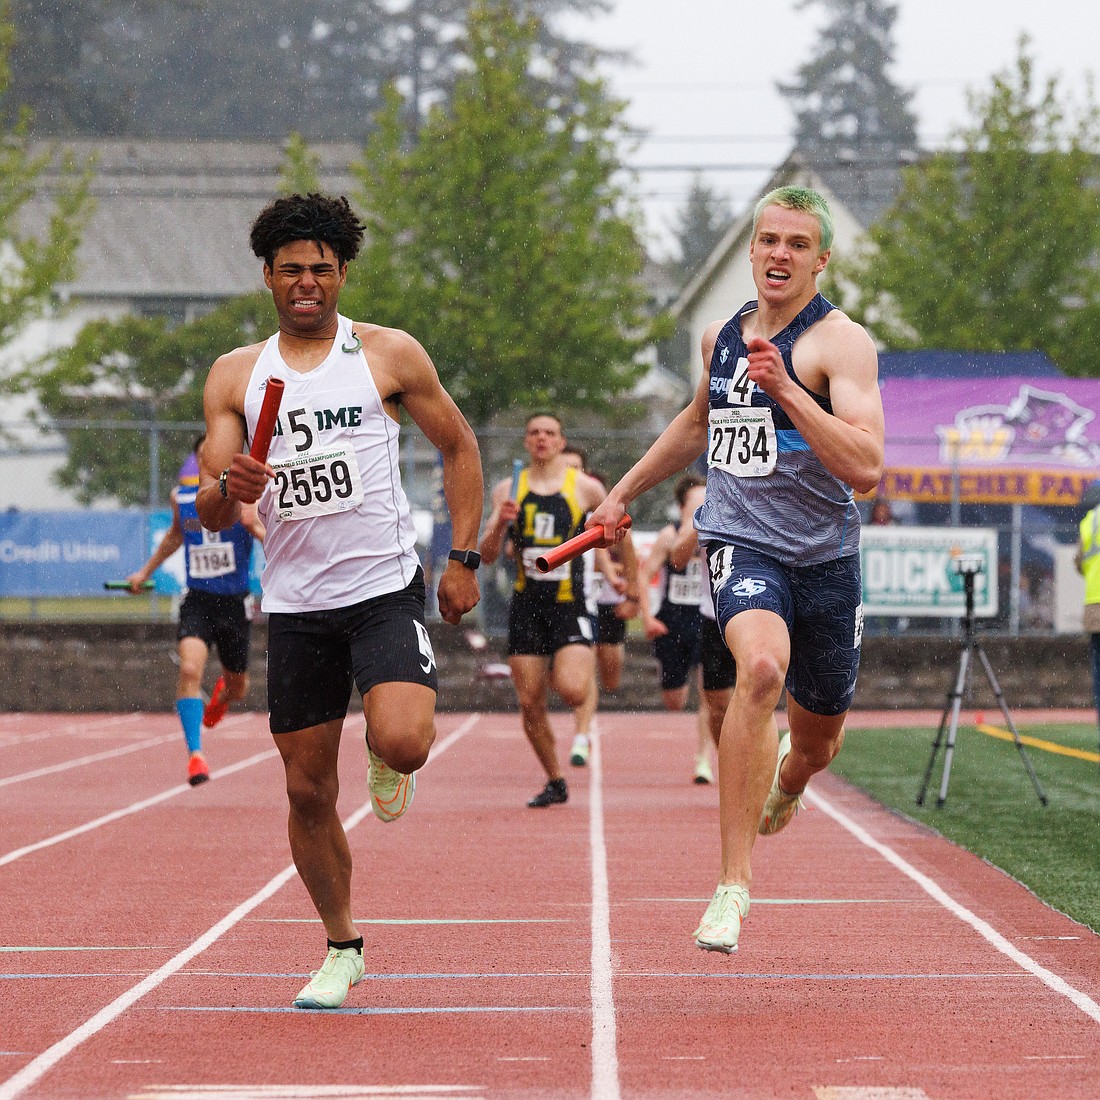 Sehome's Jake Andrews and Squalicum's Andre Korbmacher run to the finish of the boys 4x400 meter relay May 28, 2022, during the 2A state track championships in Tacoma.